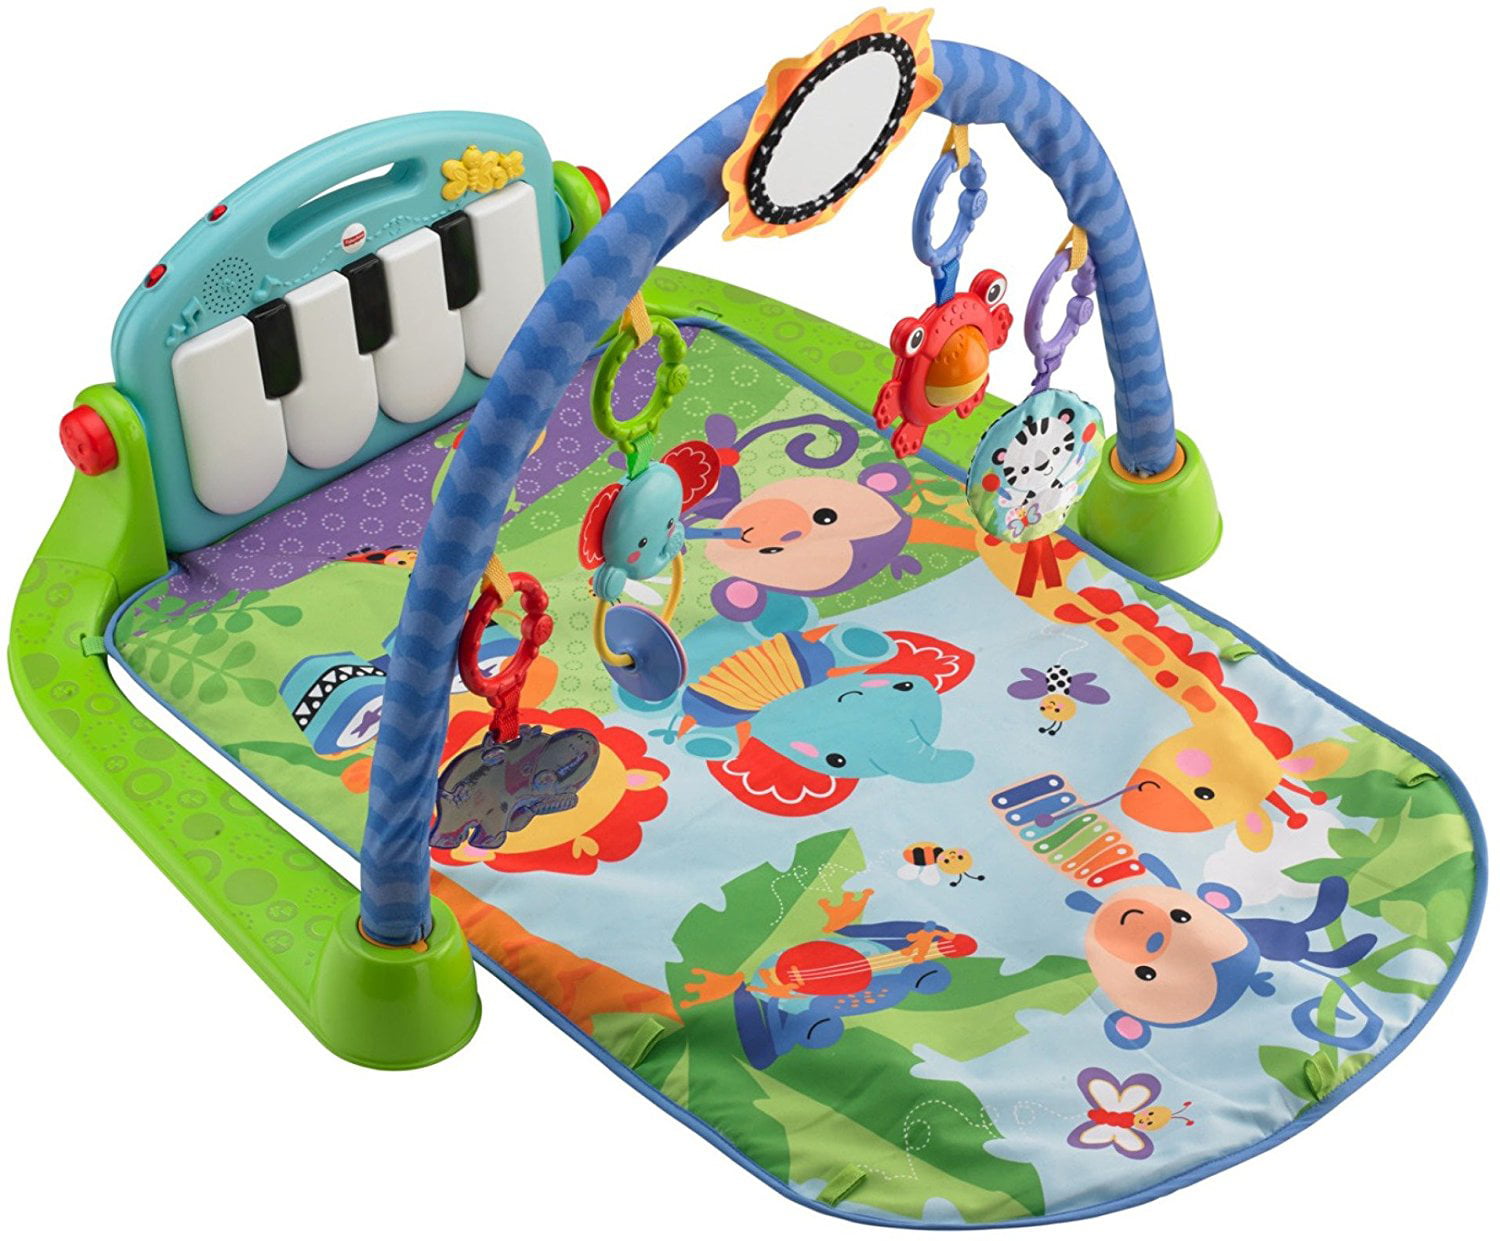 White Fisher-Price First Steps Kick and Play Piano Gym 